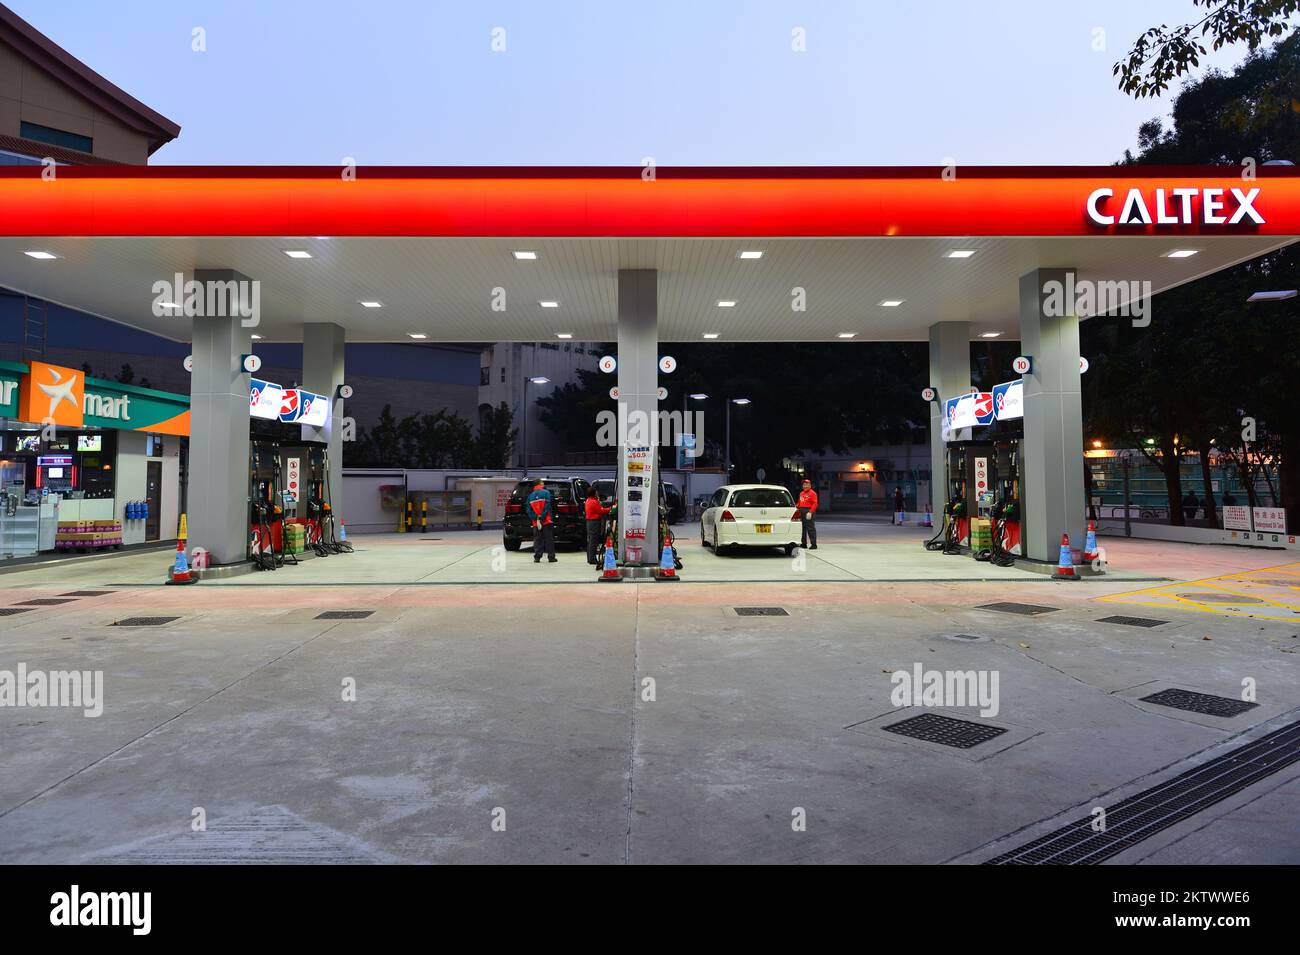 HONG KONG - FEBRUARY 04, 2015: Caltex fuel station at evening. Caltex is a petroleum brand name of Chevron Corporation used in more than 60 countries Stock Photo